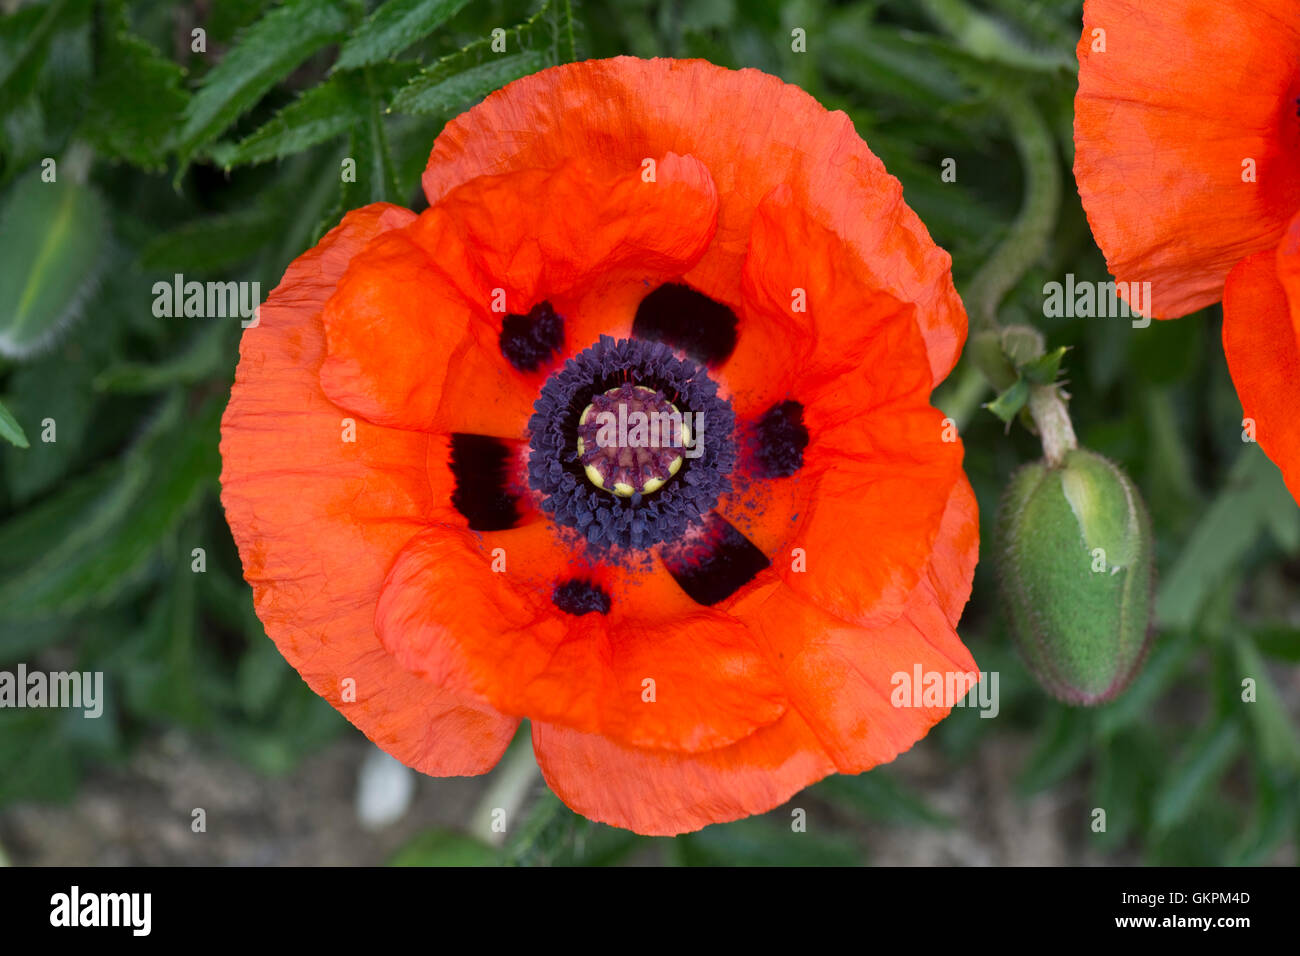 Large red flower of an oriental poppy, Papaver orientalis, with a dark markings and young anthers Stock Photo